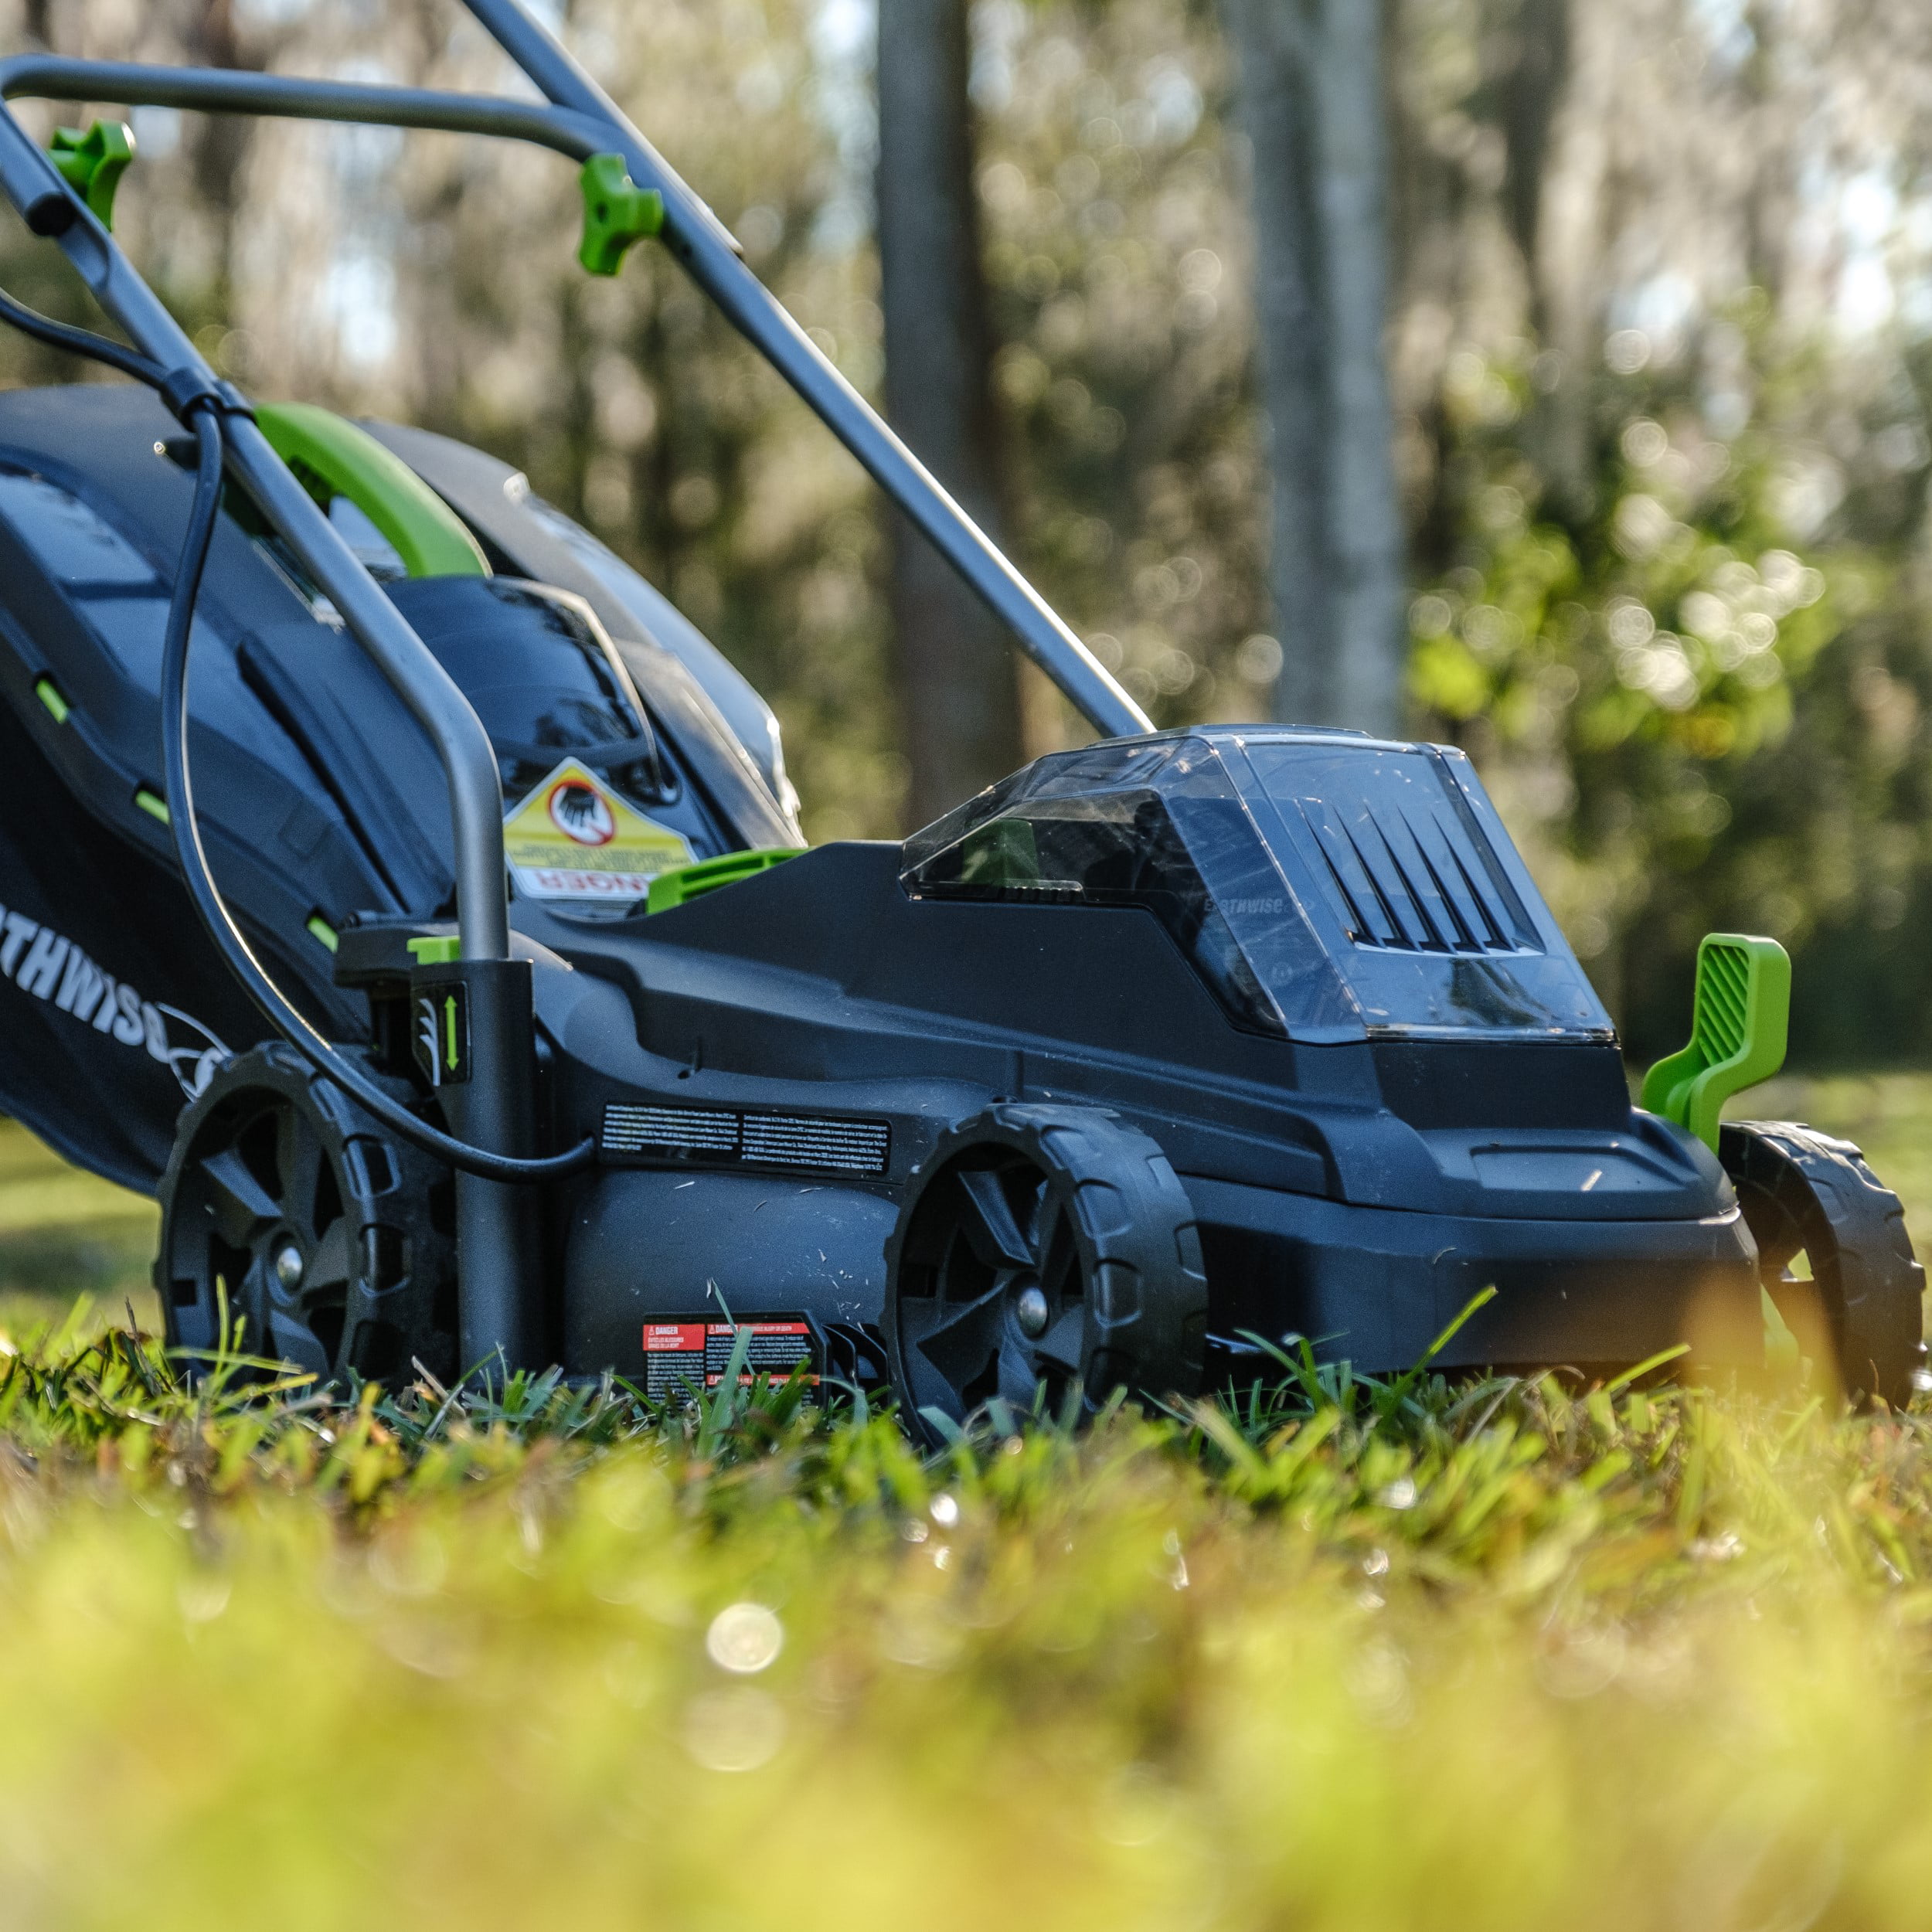 Earthwise 62014 20-Volt 14-Inch Cordless Electric Mower, 4.0Ah Battery & Fast Charger Included - 3